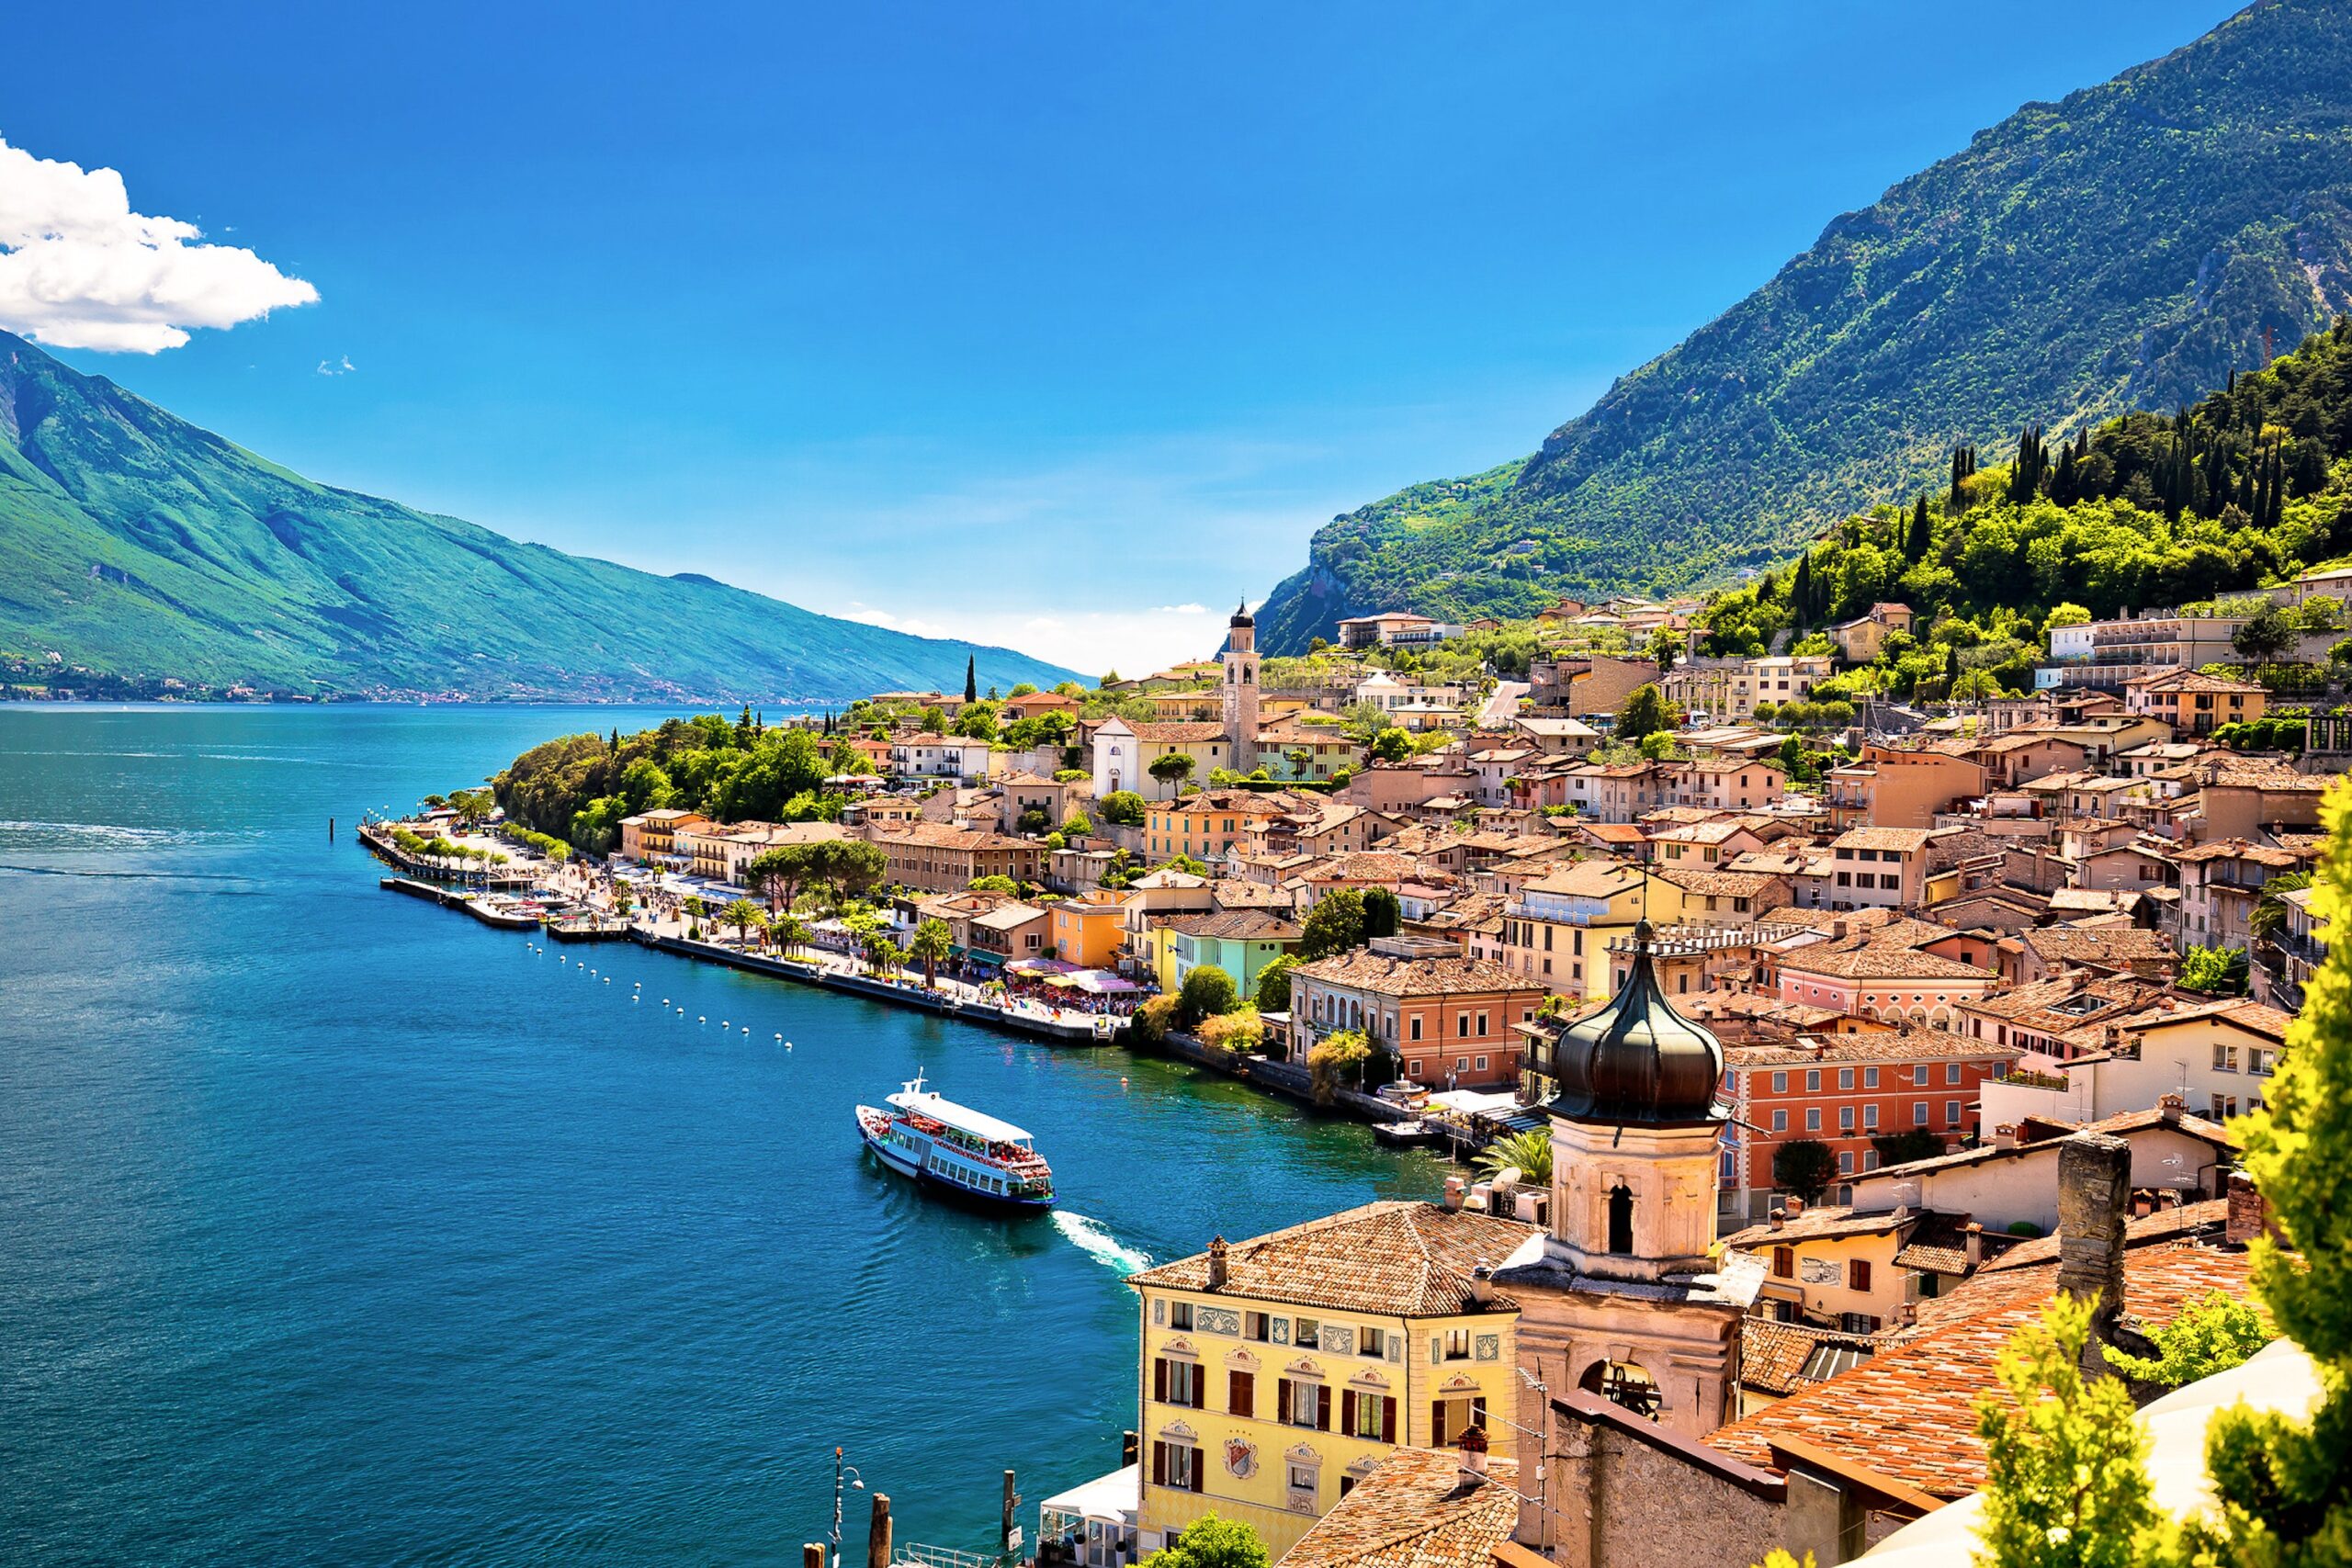 Northern Italy Tours from Milan